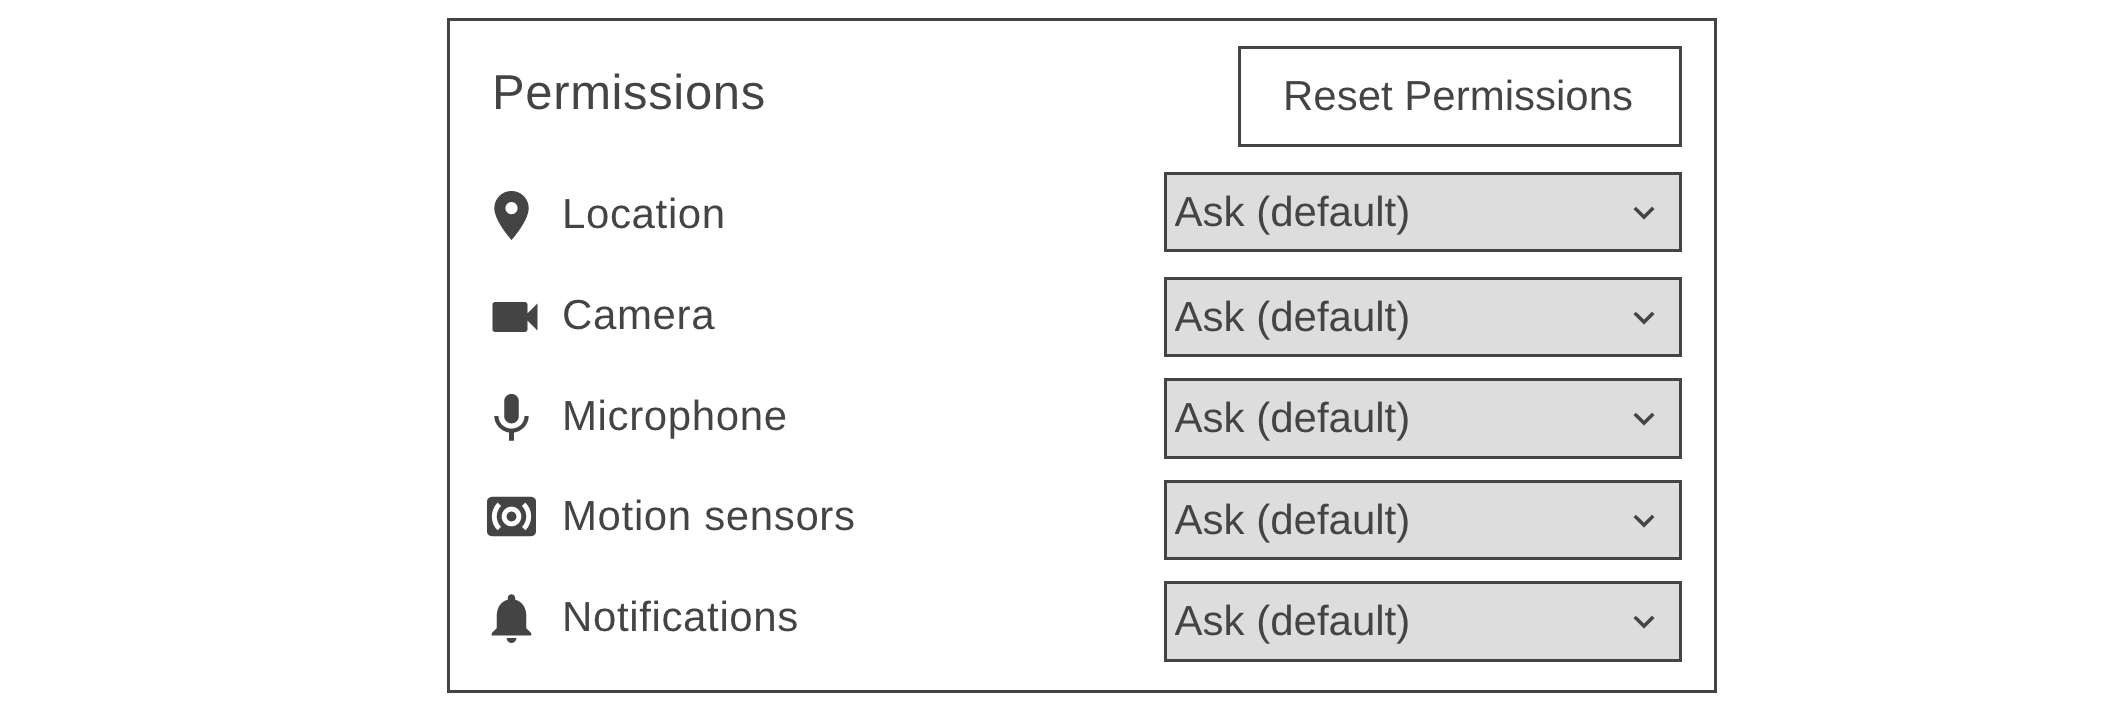 A mockup of a settings page that would allow a user to set or reset defaults for location, camera, microphone, motion sensors, and notifications permissions.